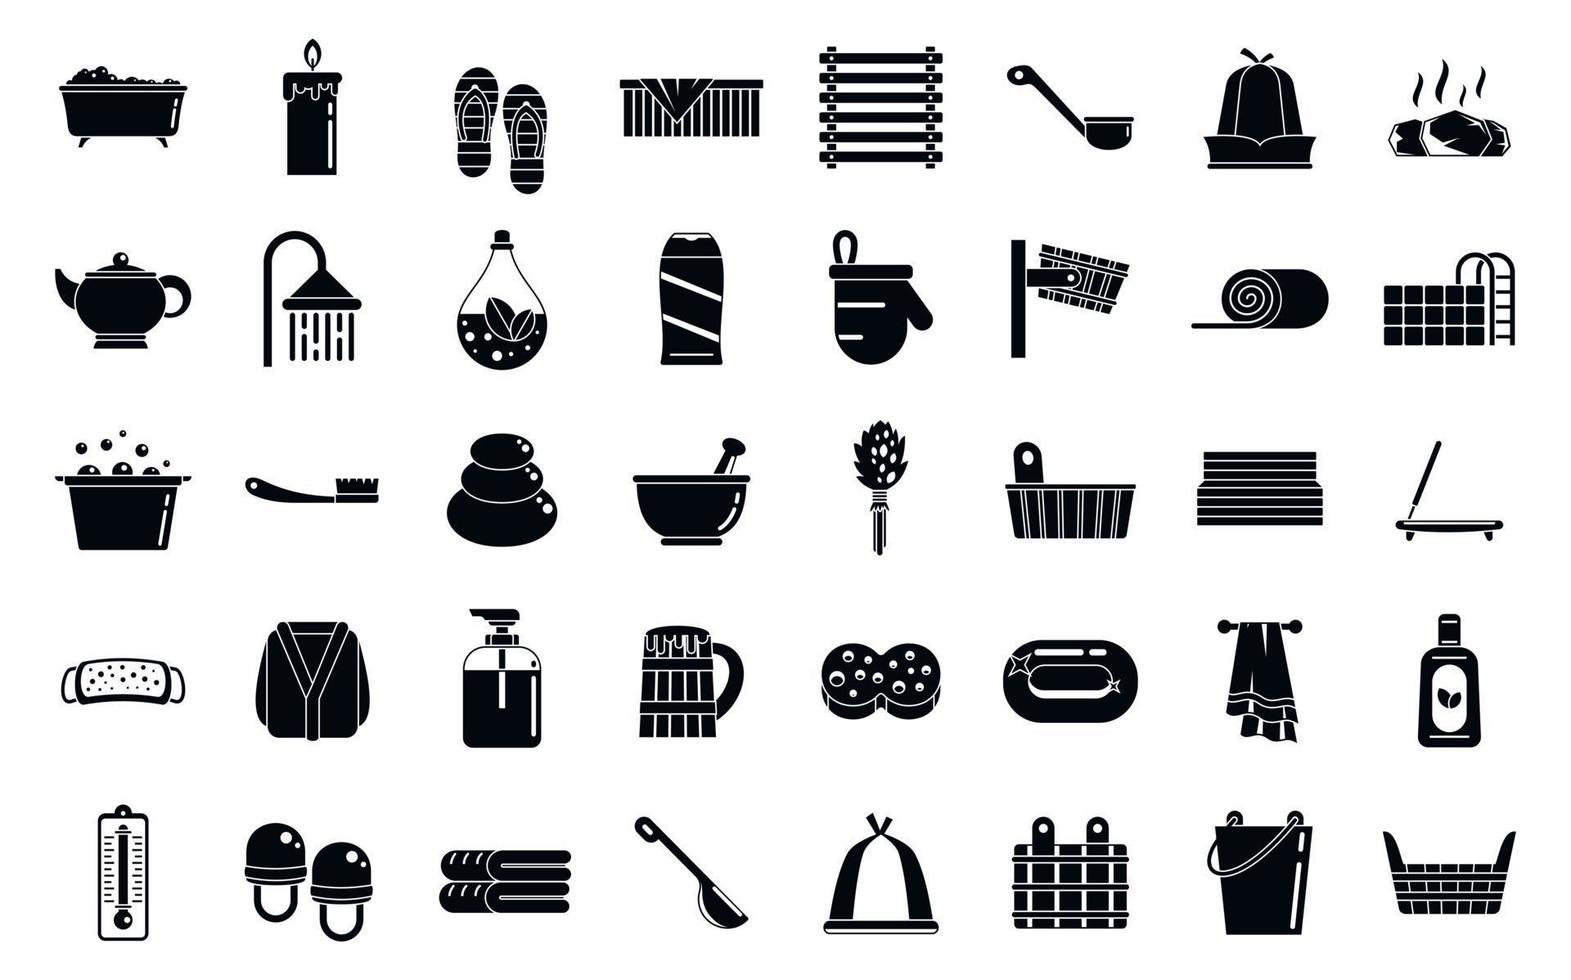 Sauna shower icons set, simple style vector